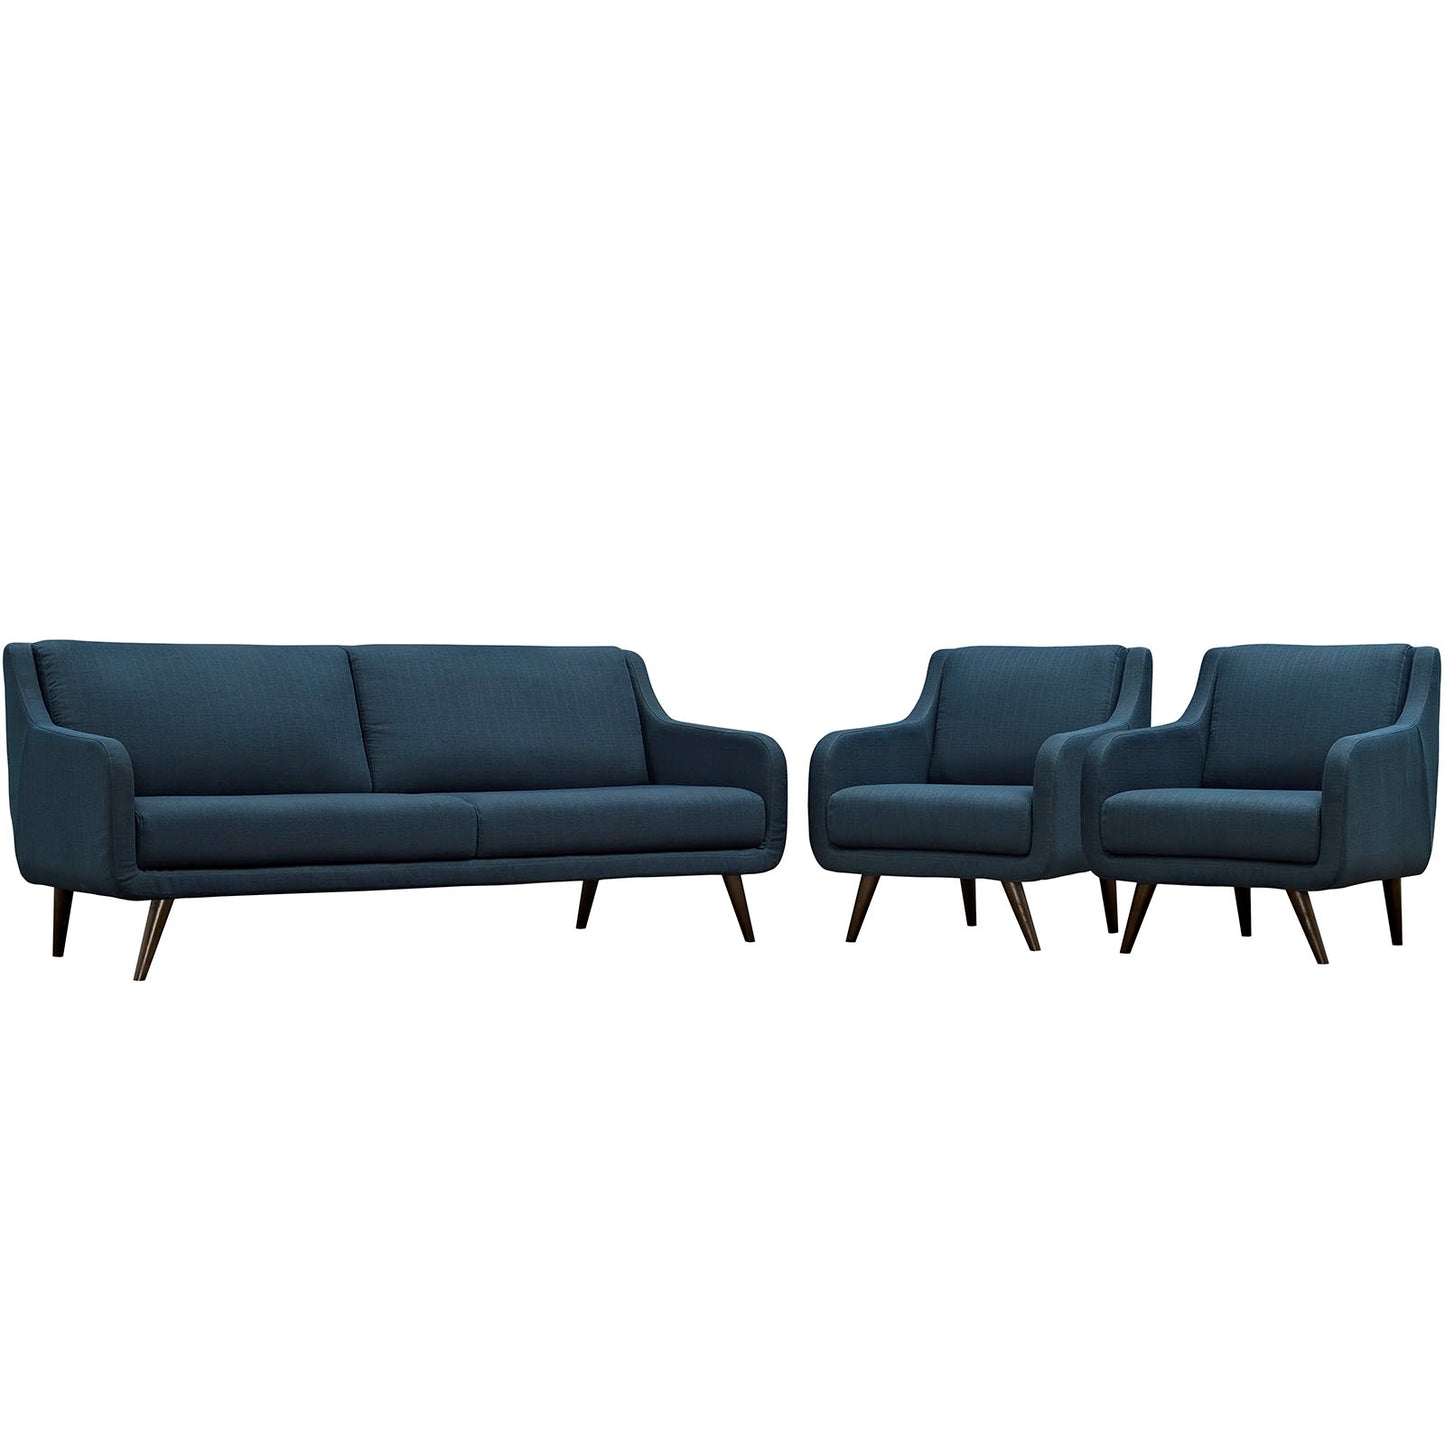 Verve Living Room Set Set of 3 By Modway - EEI-2445